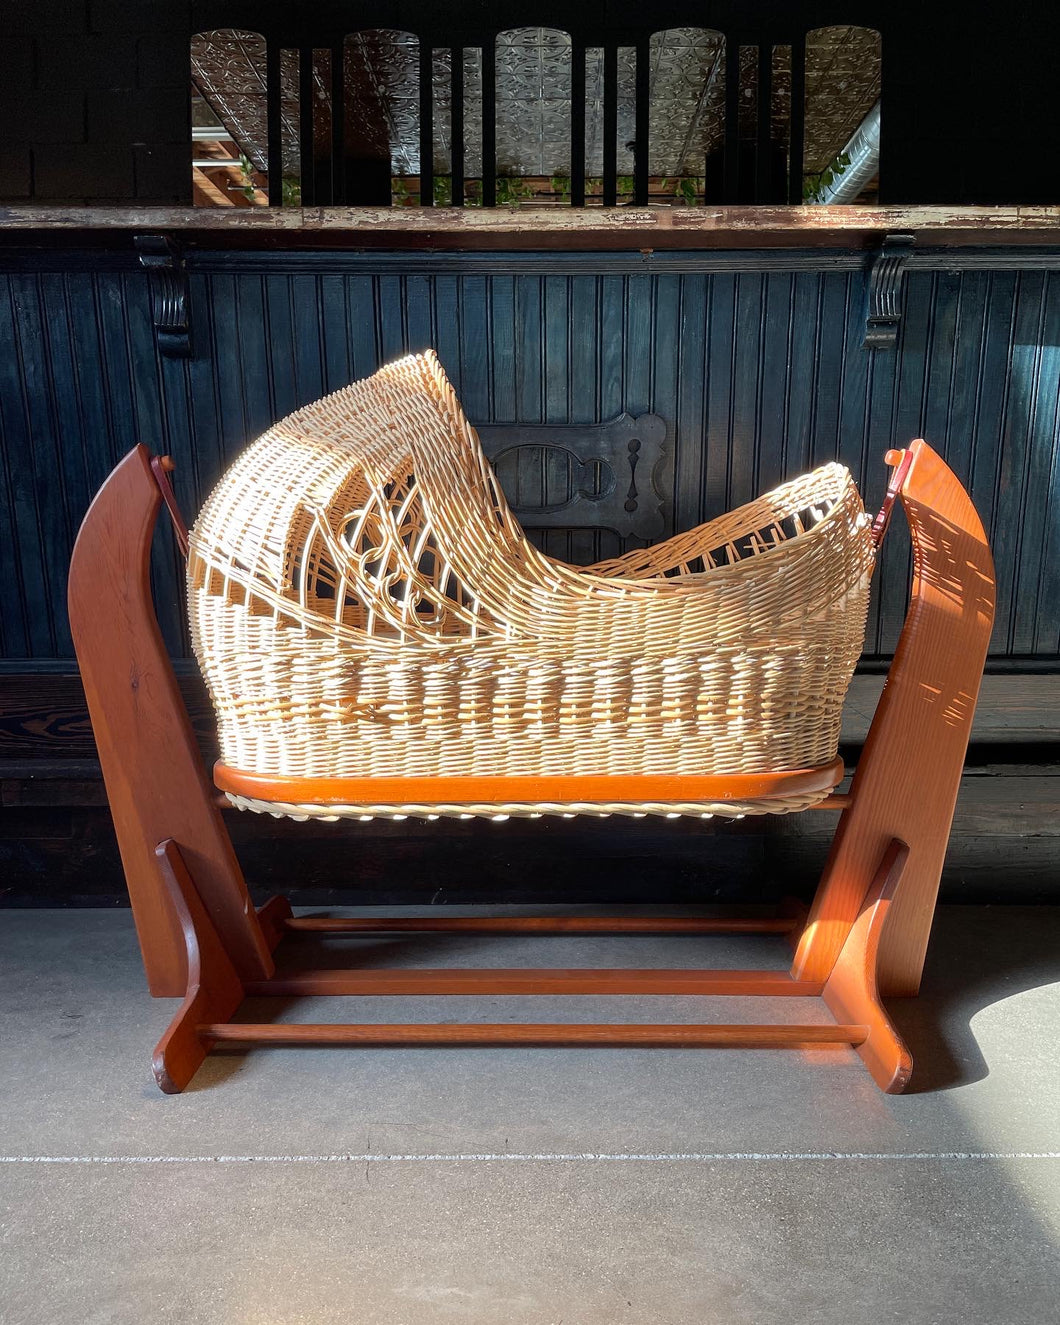 Homemade Wicker, Wood and Leather Bassinet